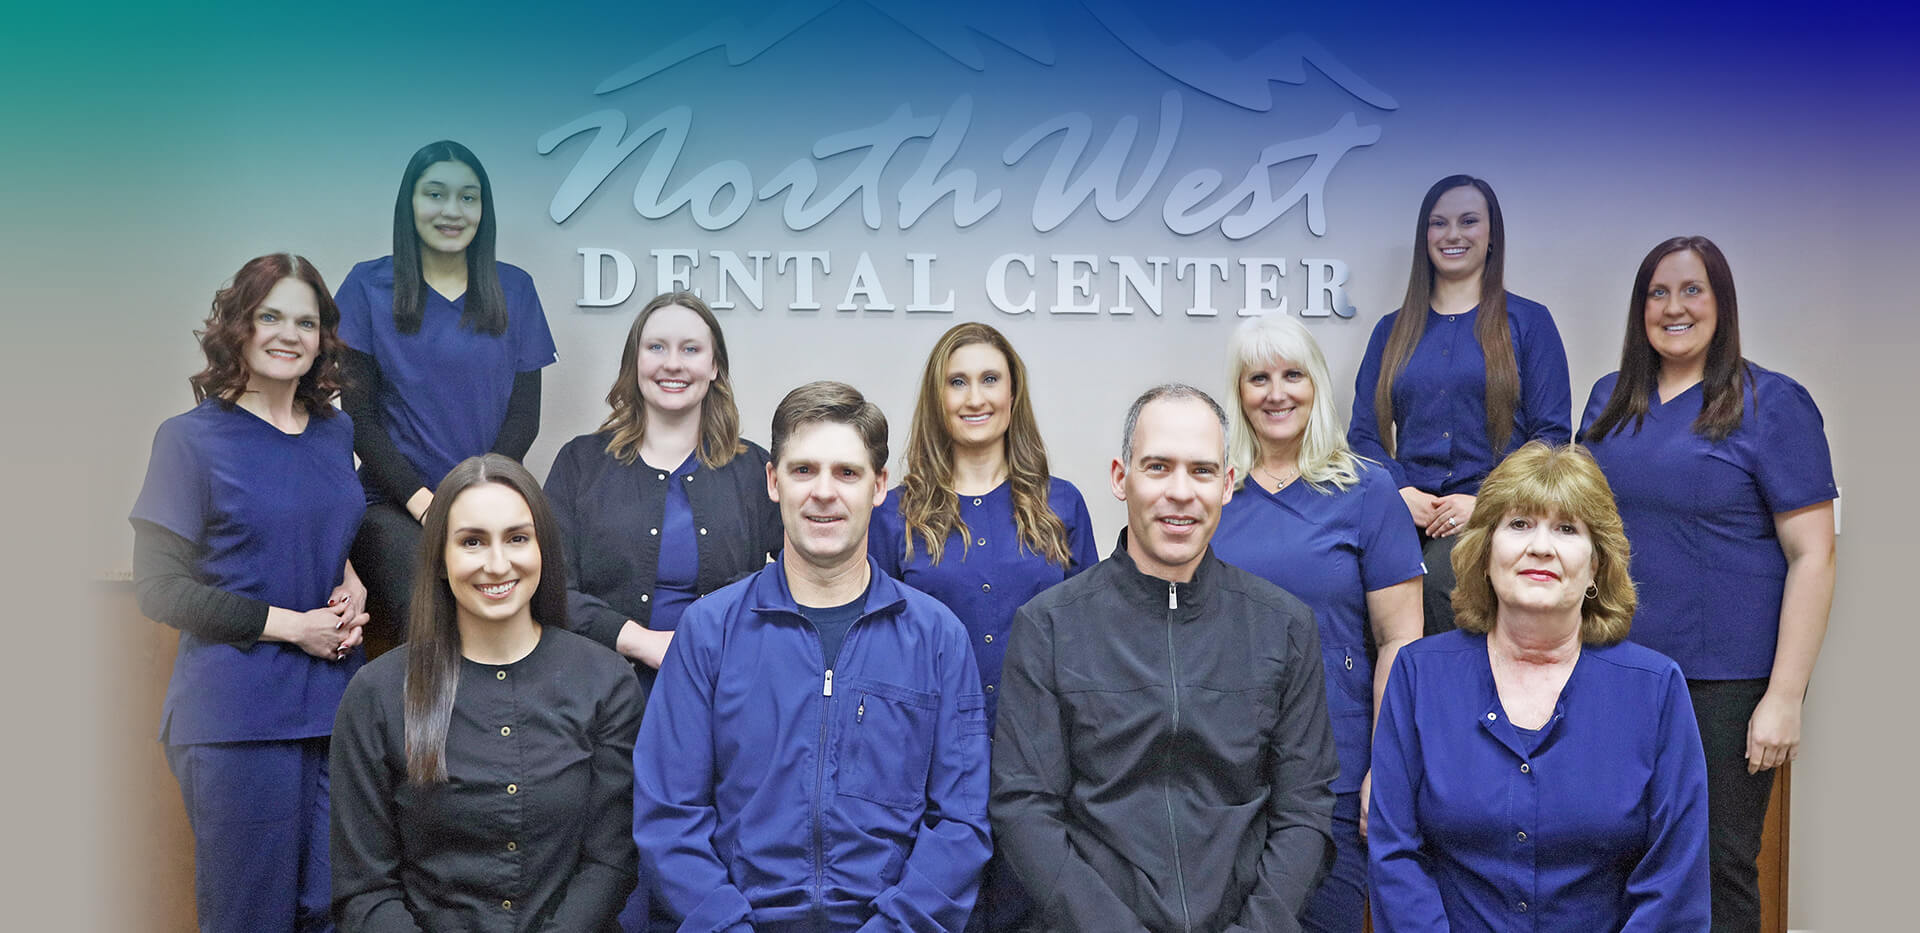 Our Team, Welcome to Northwest Dental Center